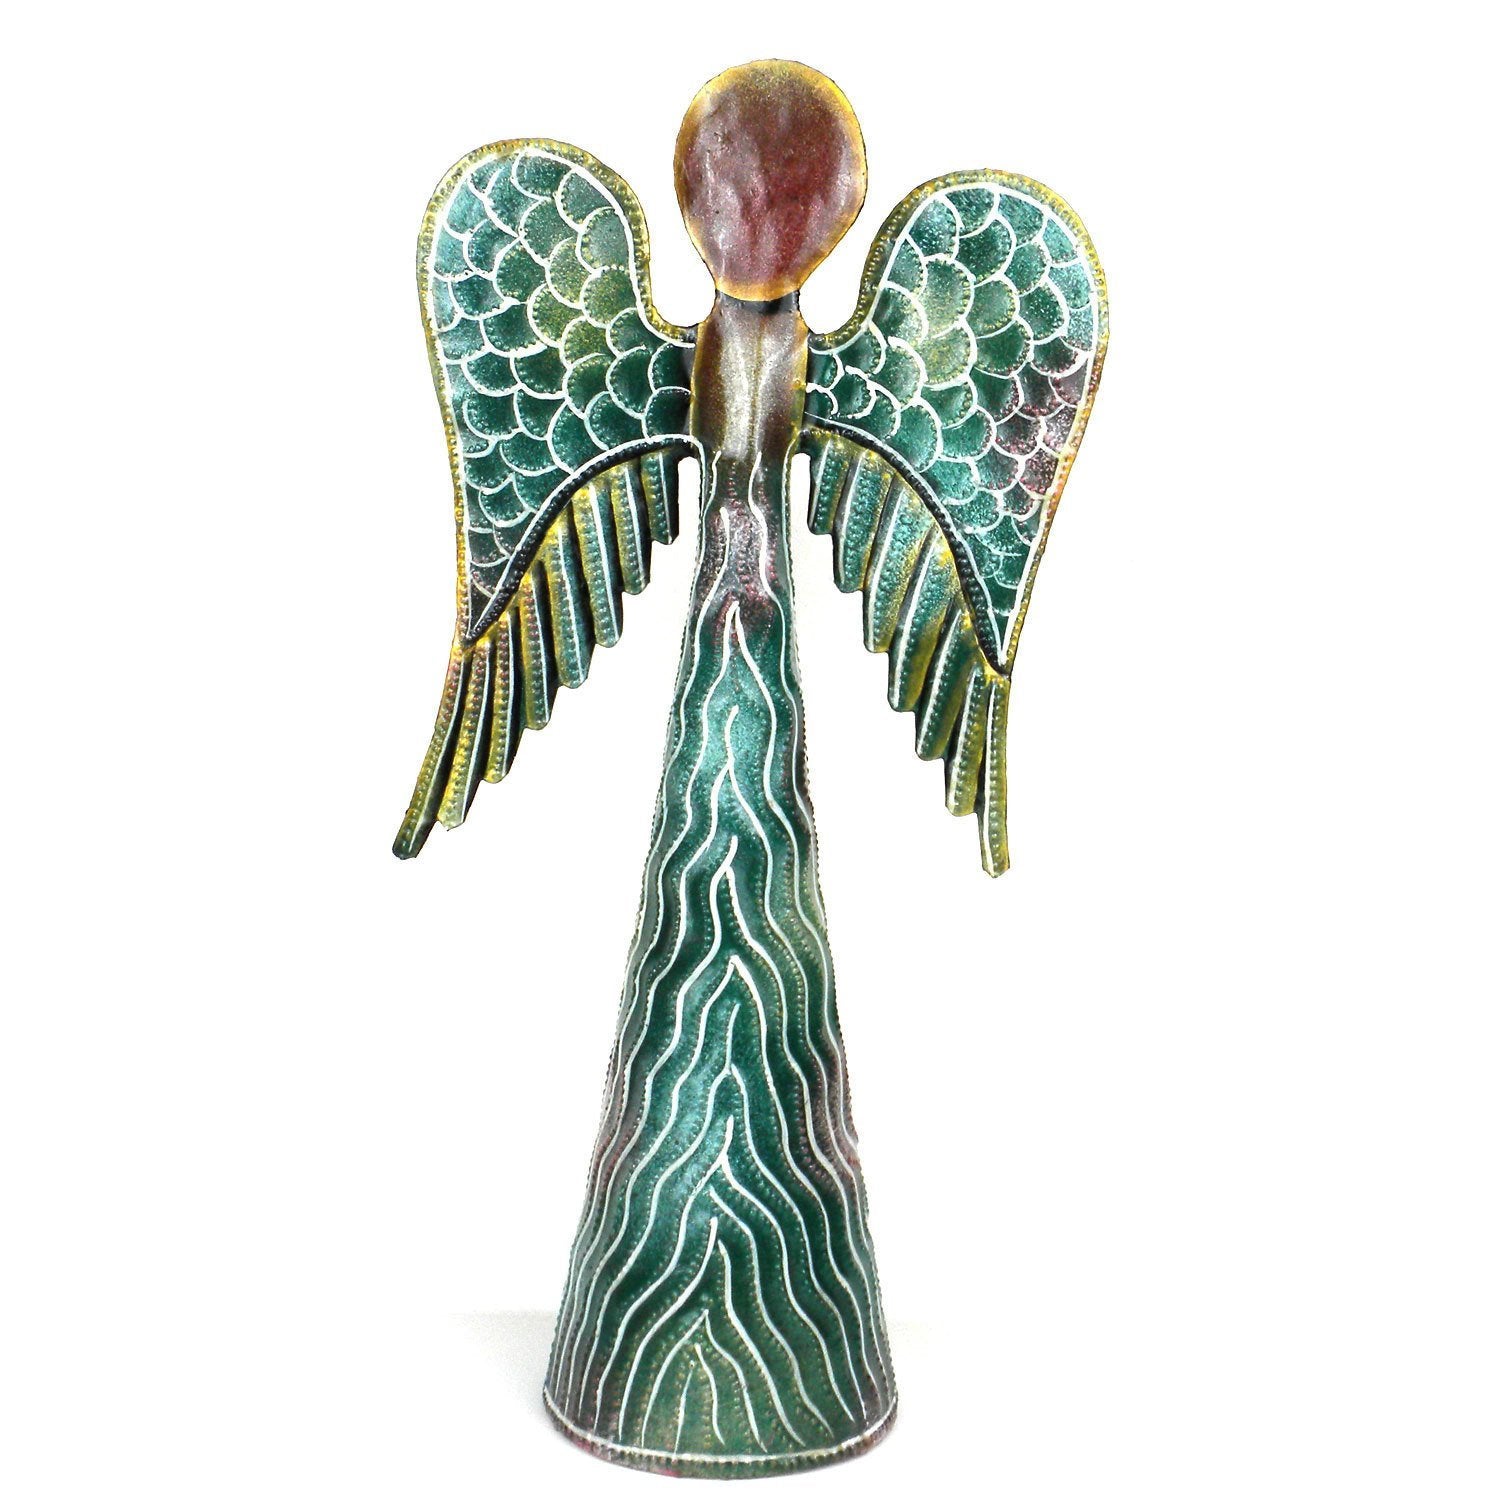 12-inch Hand Painted Metalwork Angel - Green - Croix des Bouquets (H)